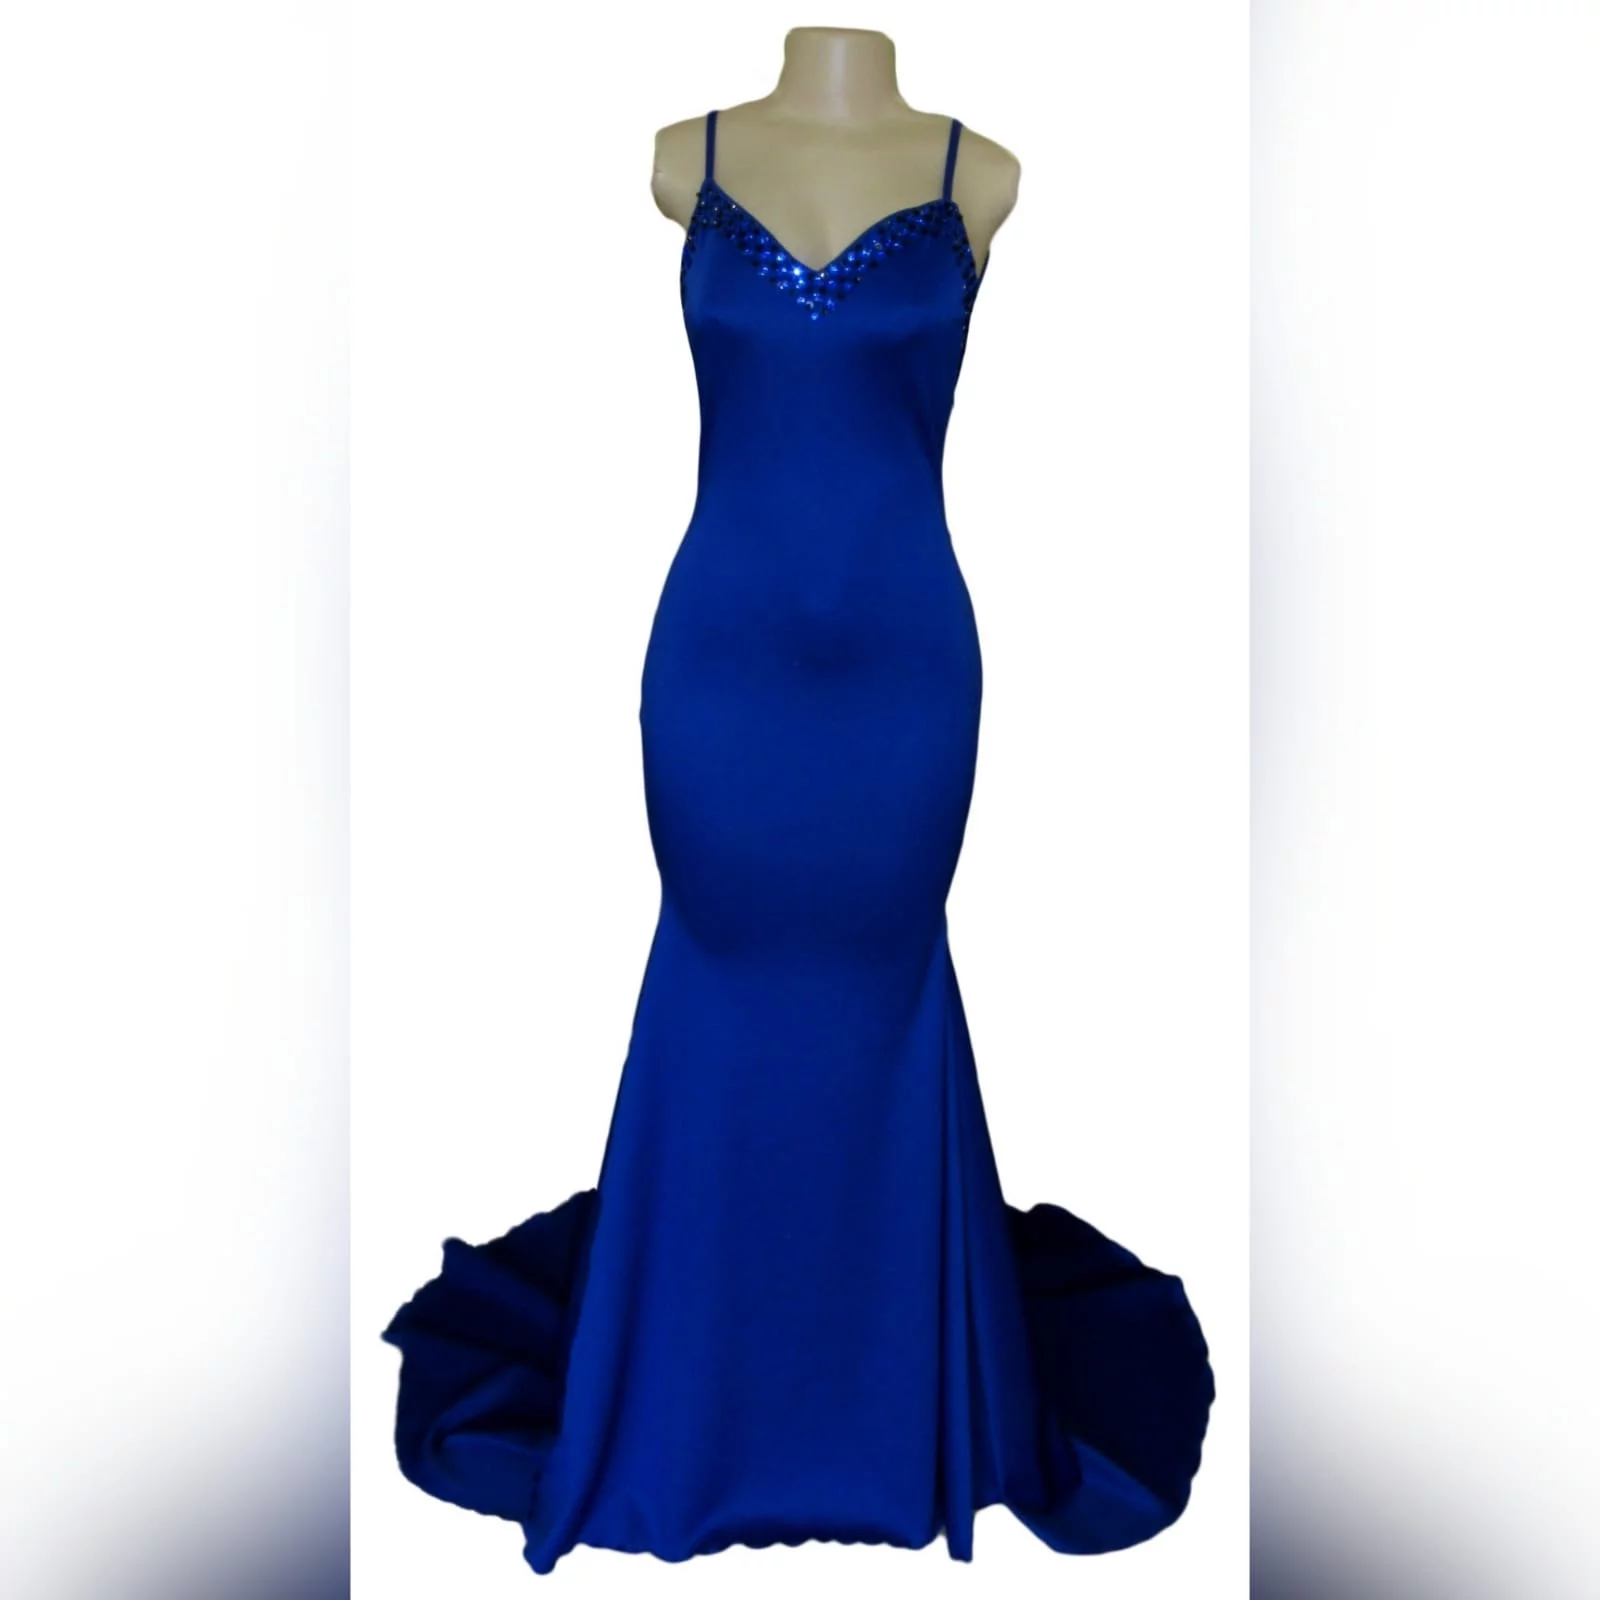 Royal blue soft mermaid beaded prom dress 2 royal blue soft mermaid beaded prom dress, with a v neckline, low v open back detailed with blue and black beads, thin shoulder straps and a long train.